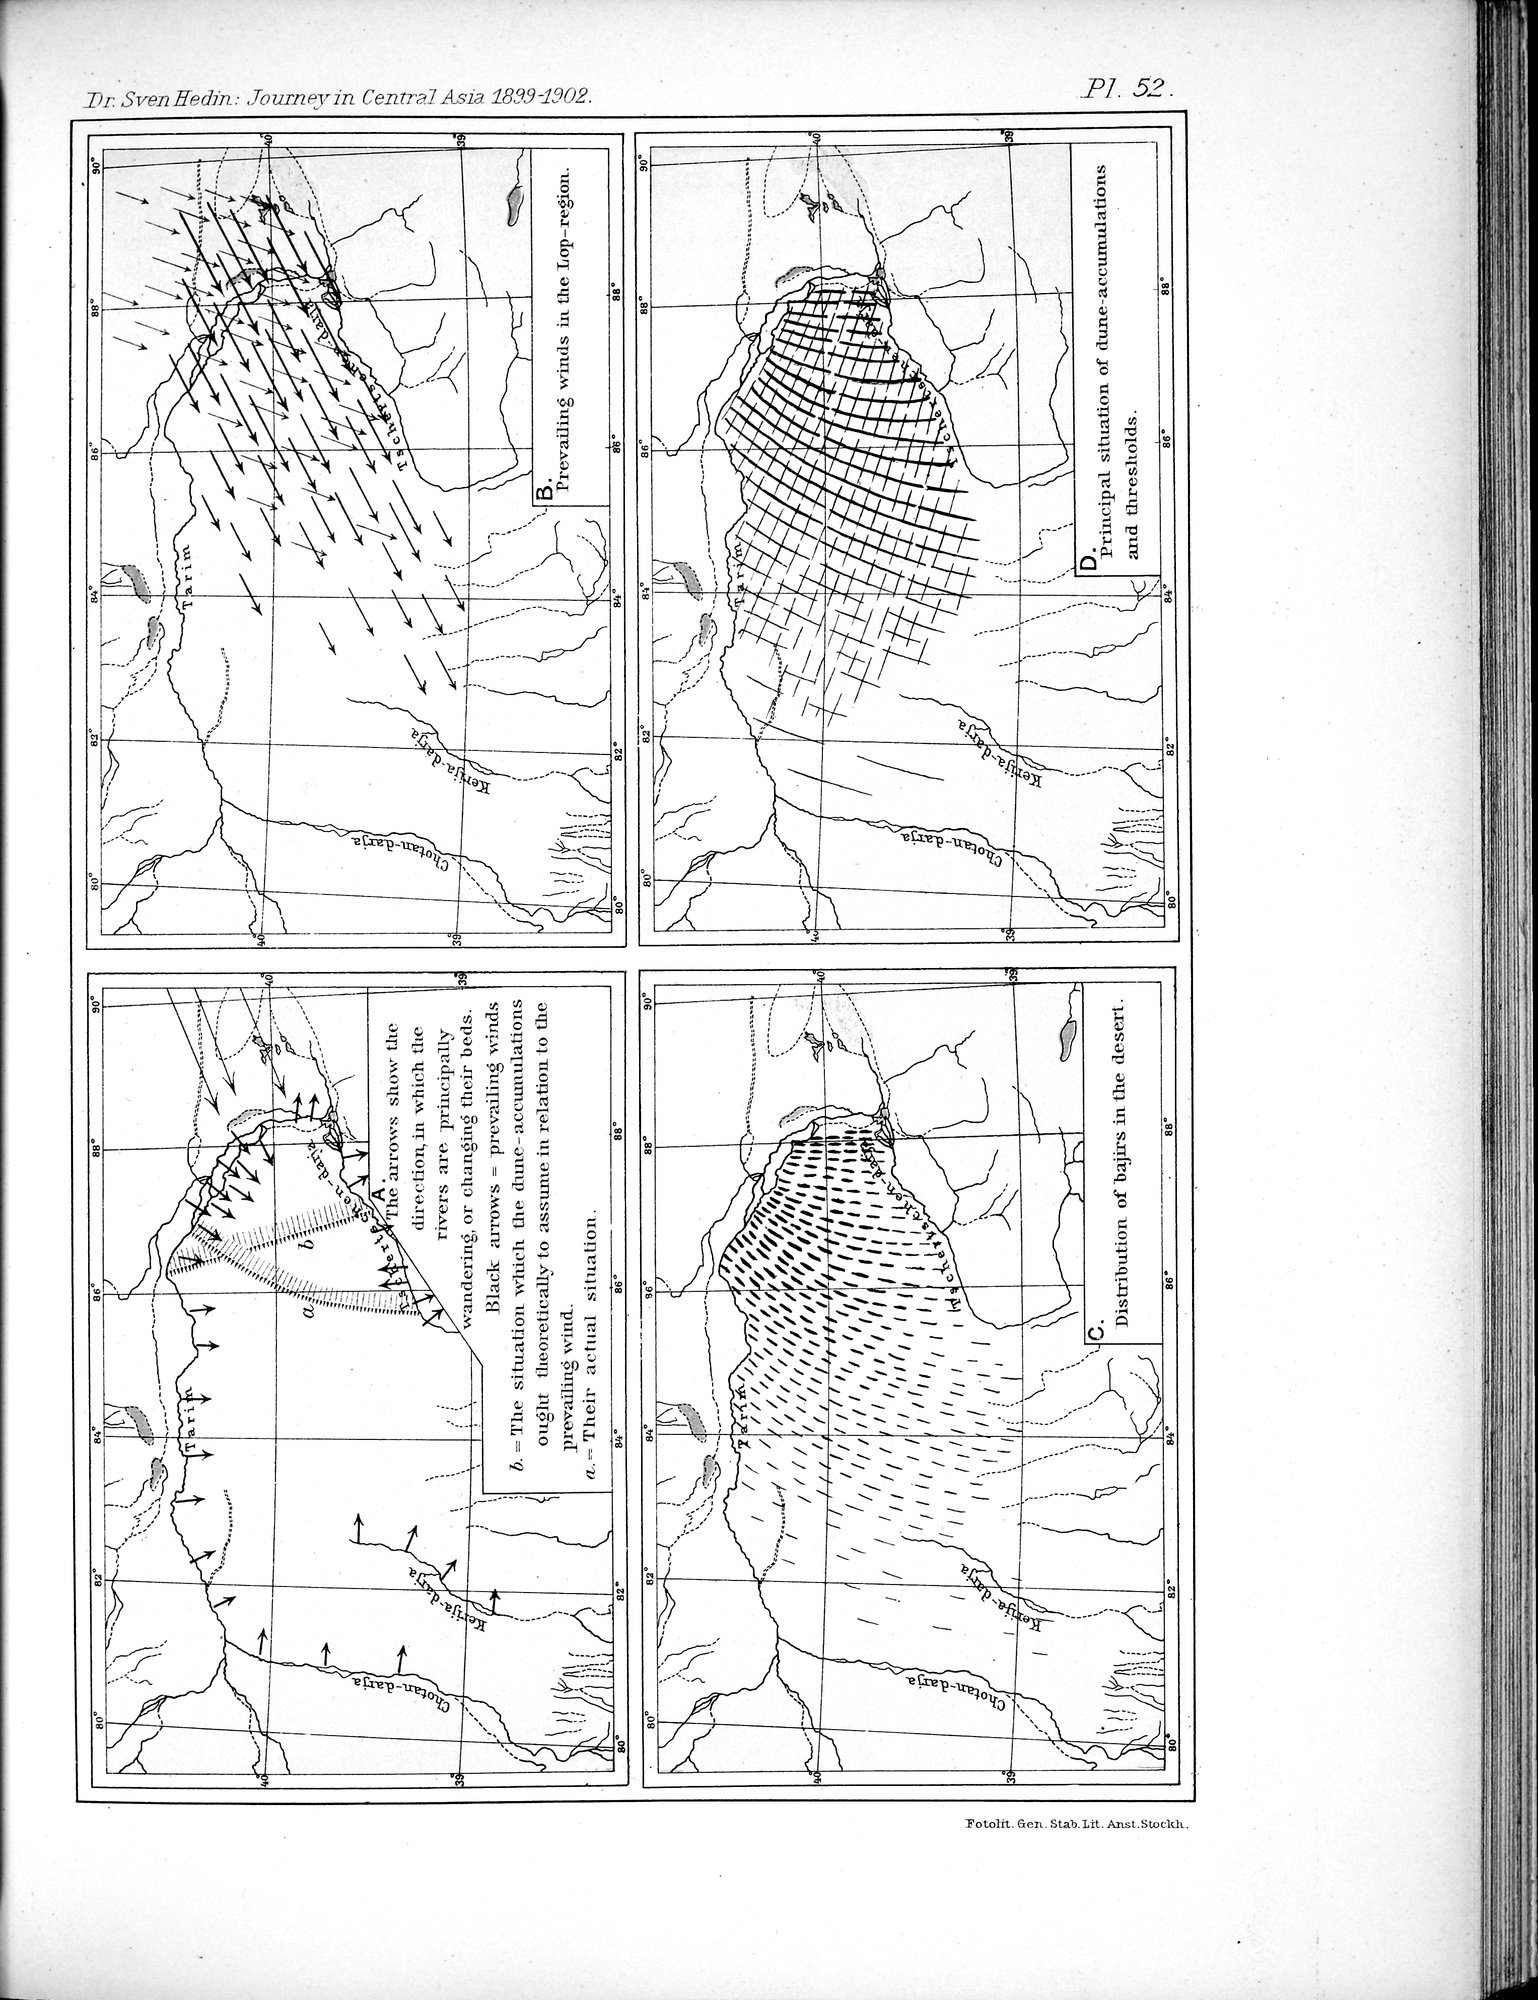 Scientific Results of a Journey in Central Asia, 1899-1902 : vol.1 / 485 ページ（白黒高解像度画像）